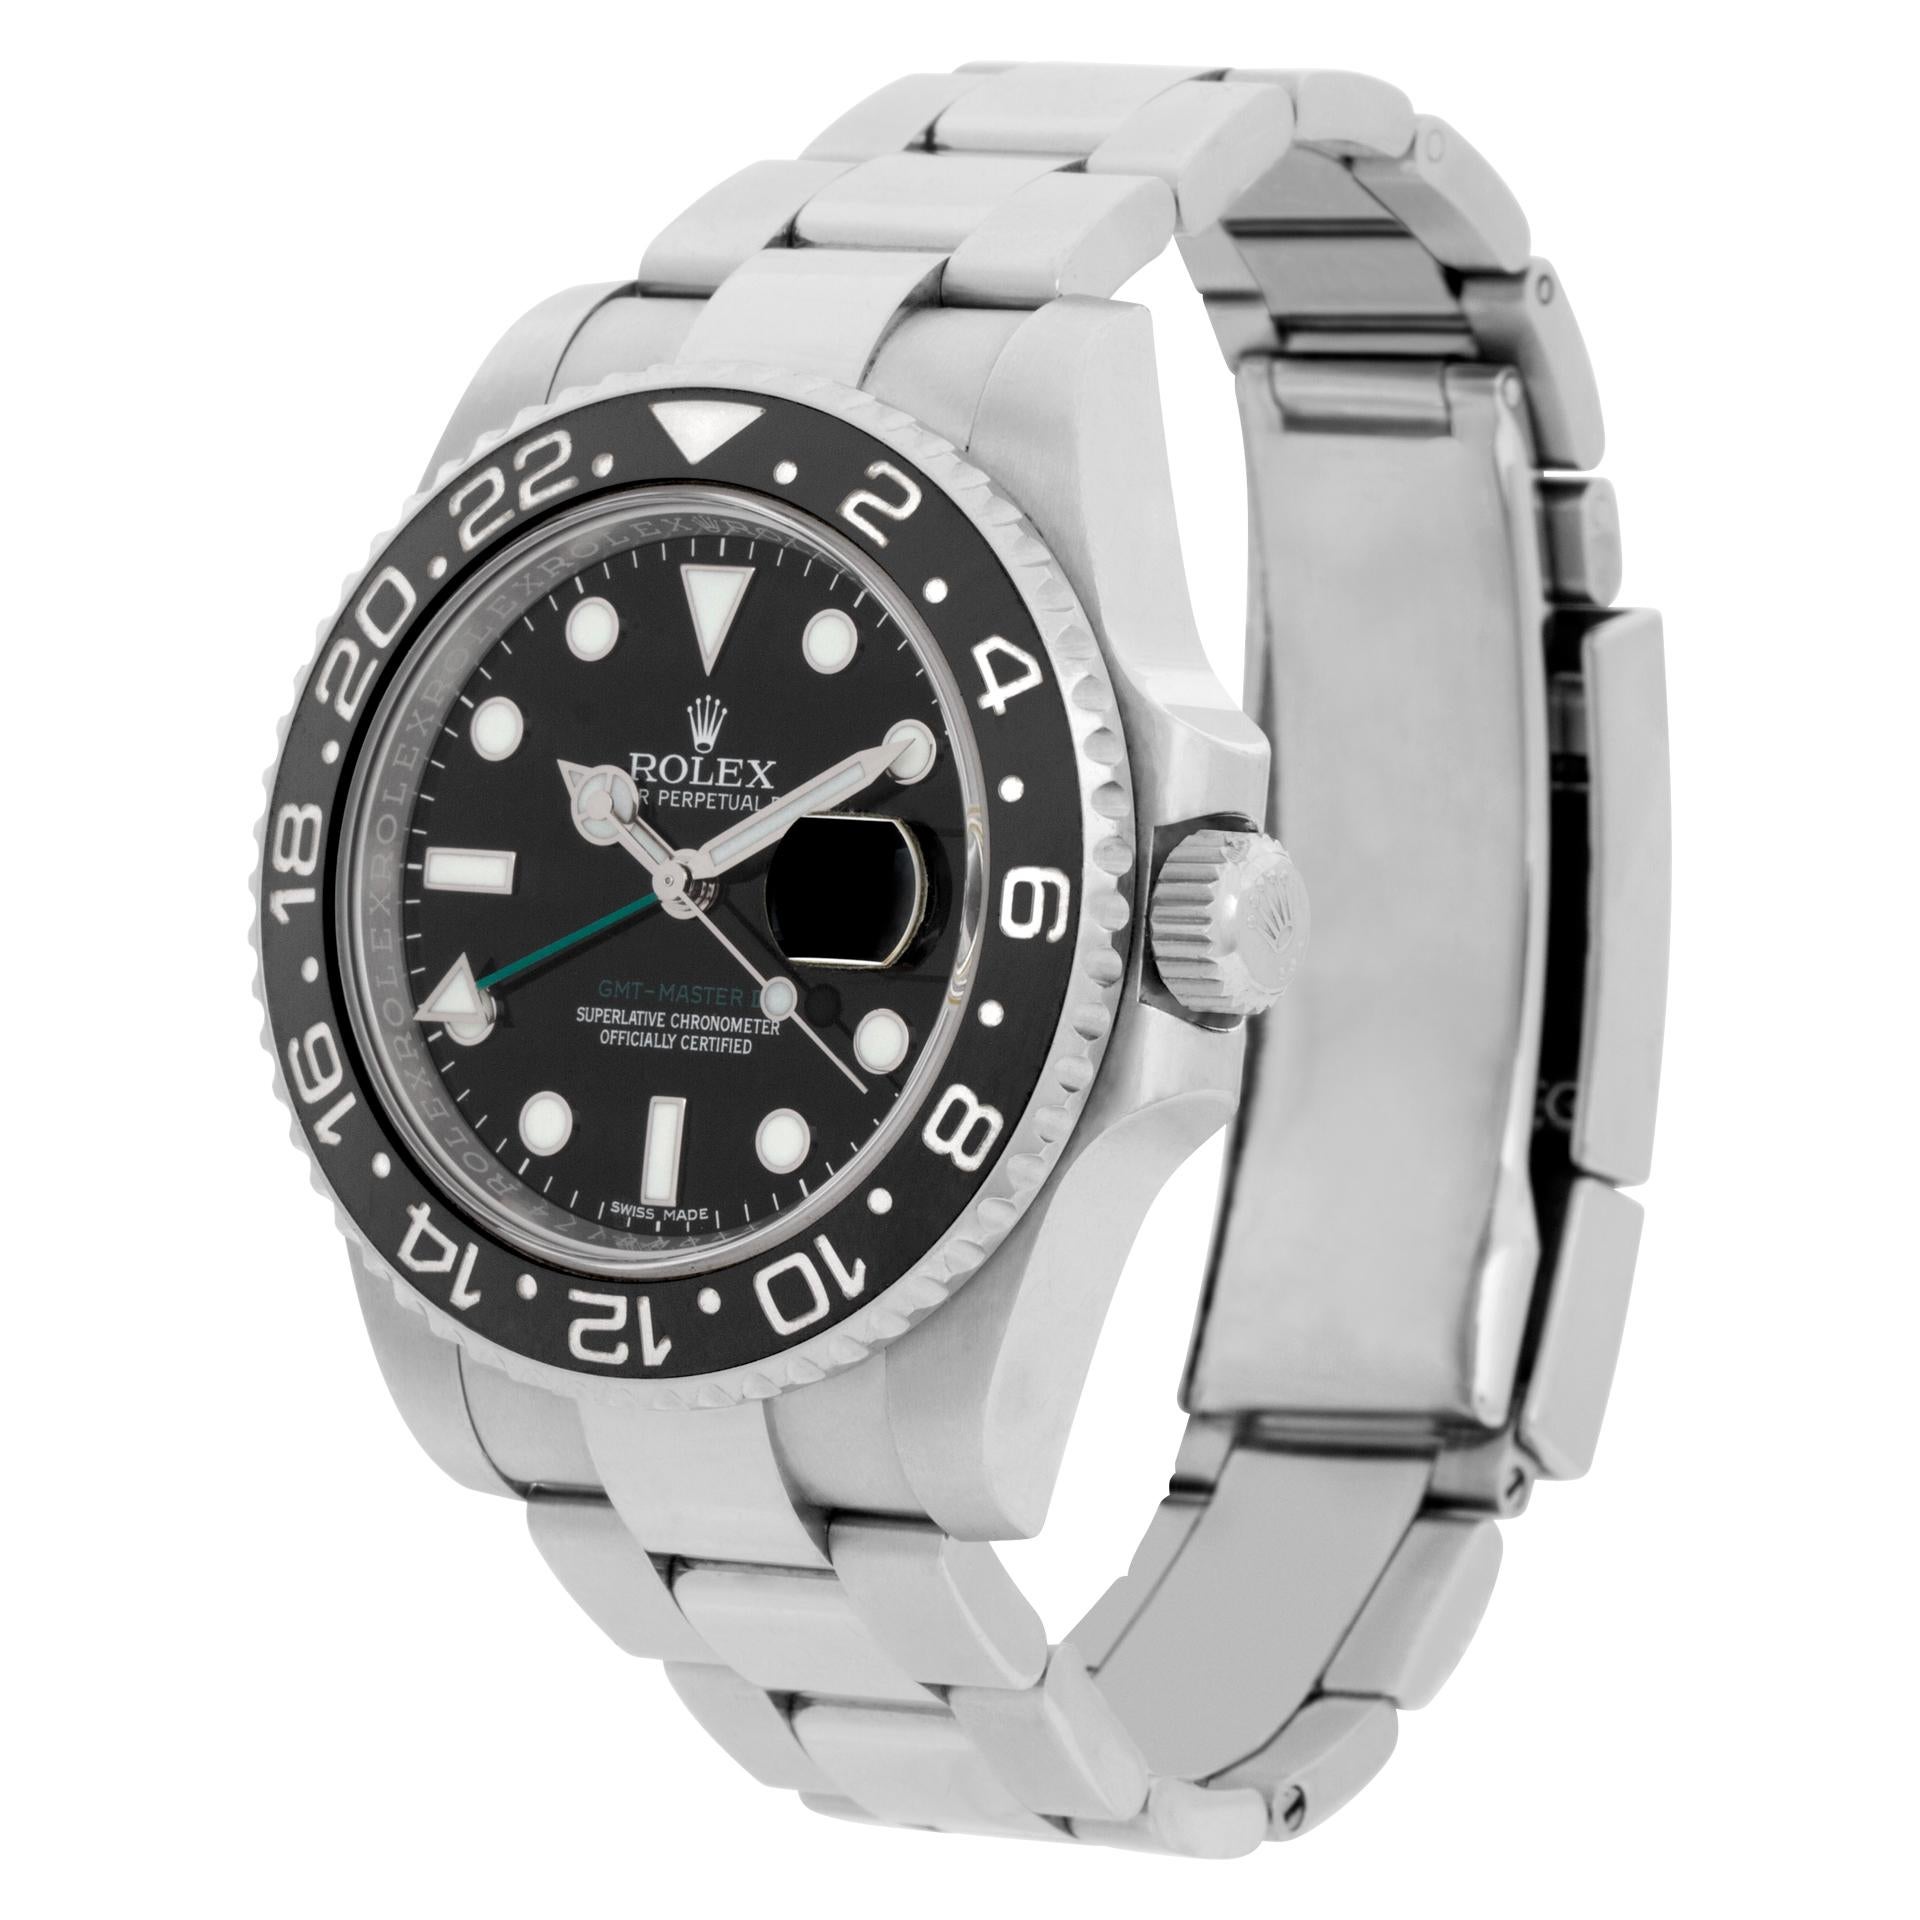 Rolex GMT-Master II in stainless steel with rotating ceramic bezel. Auto w/ sweep seconds, date and dual time. 40 mm case size. **Bank wire only at this price** Ref 116710LN. Circa 2010s. Fine Pre-owned Rolex Watch.

Certified preowned Sport Rolex